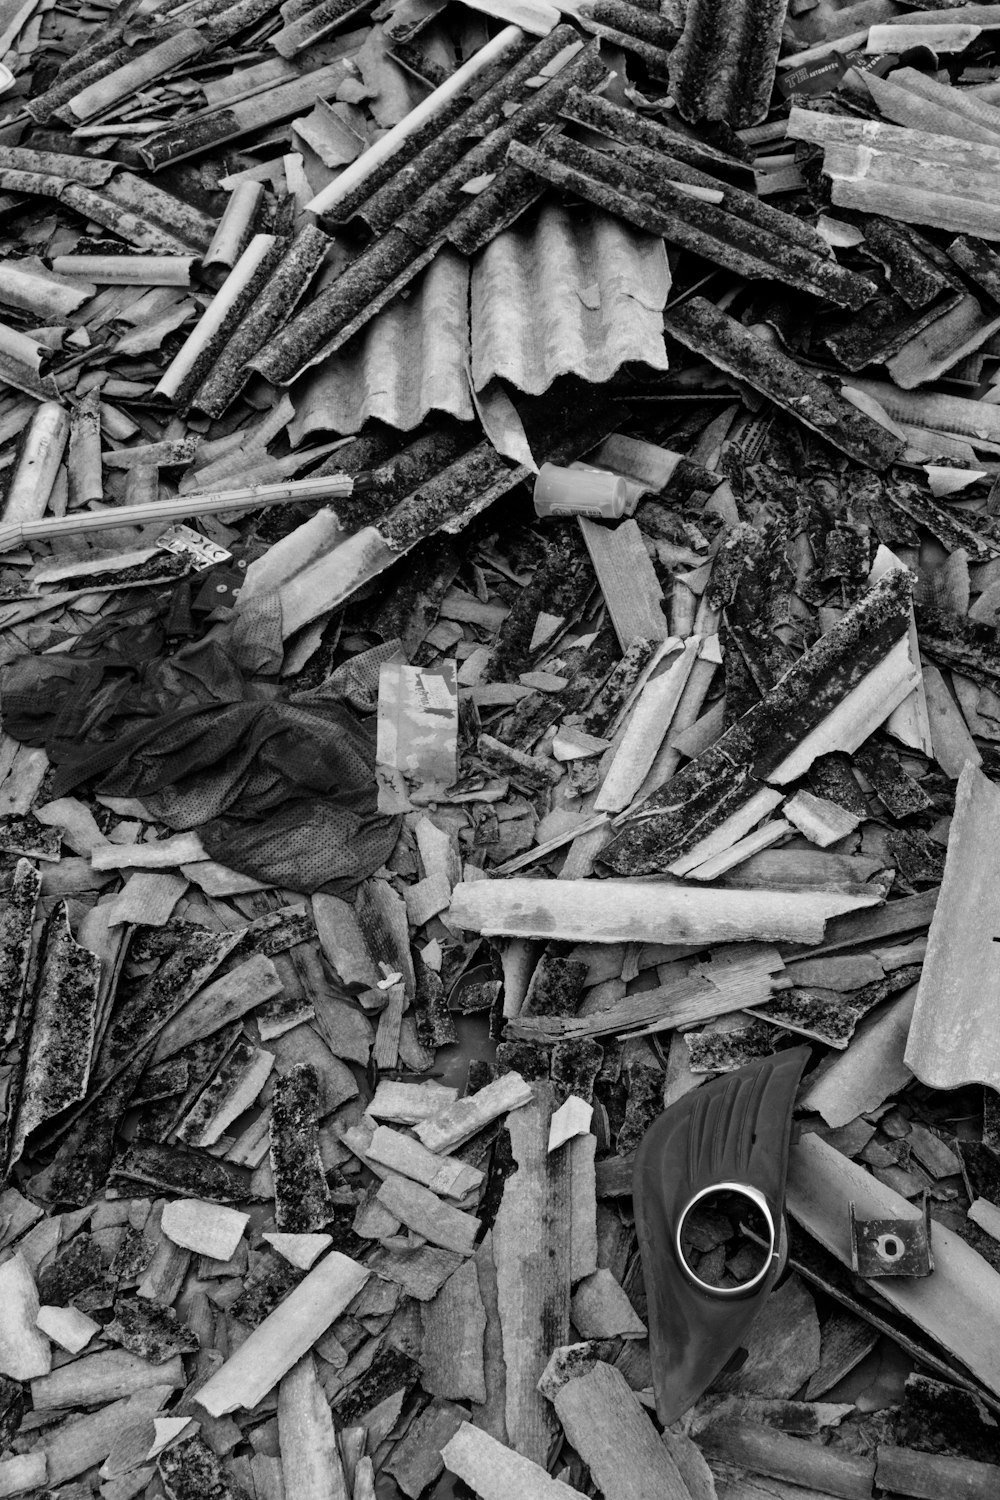 a pile of wood shavings and a pair of scissors